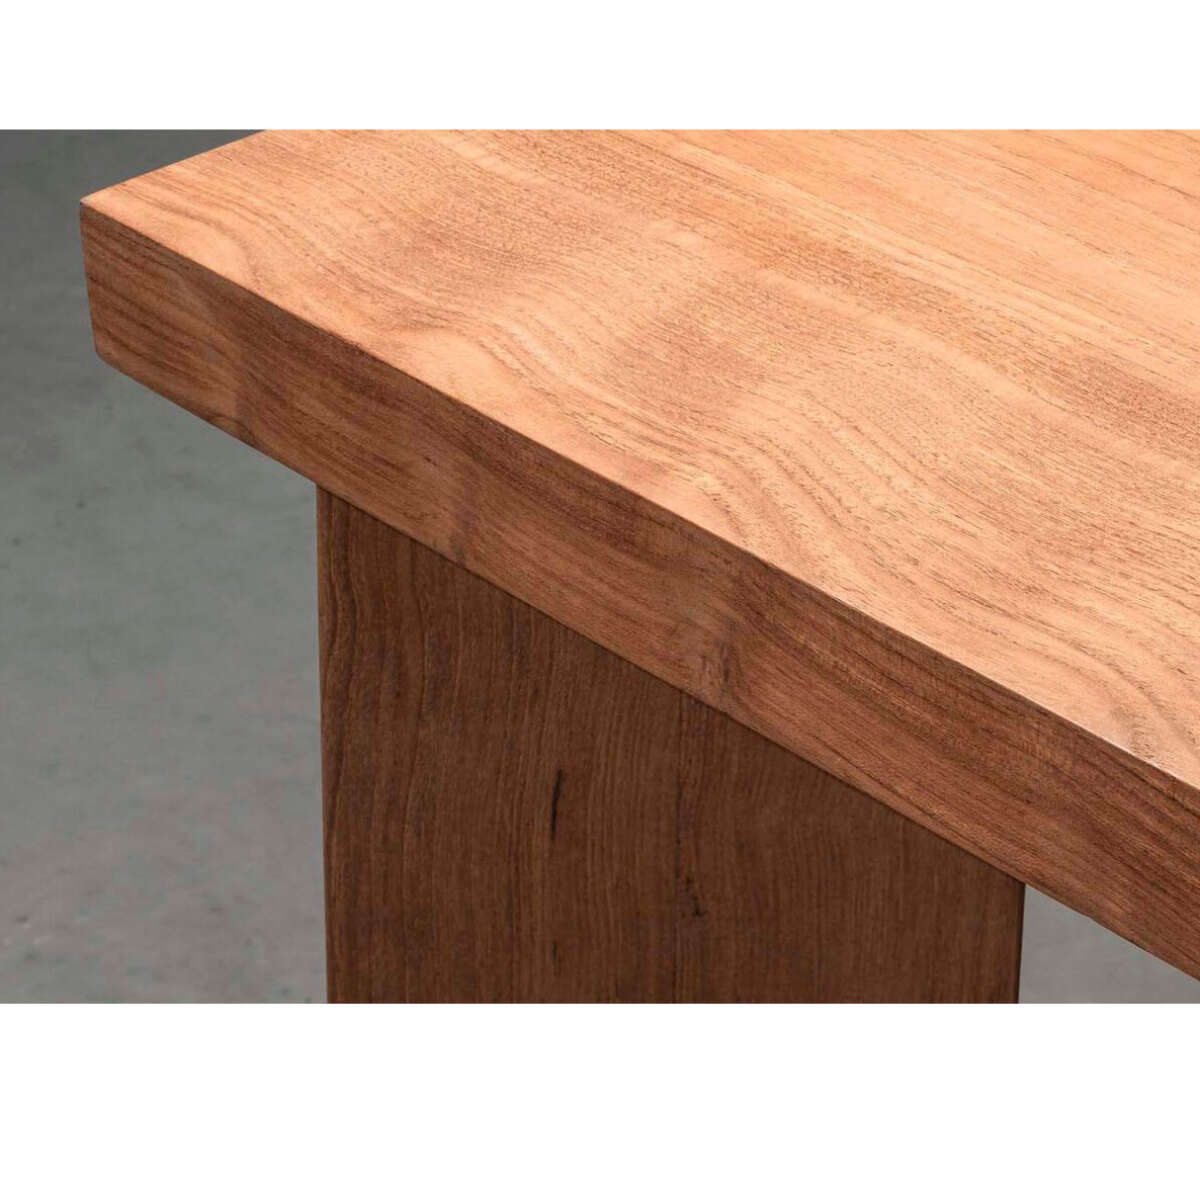 Piet Boon Timme Dining Table Detail The Modern Garden Company